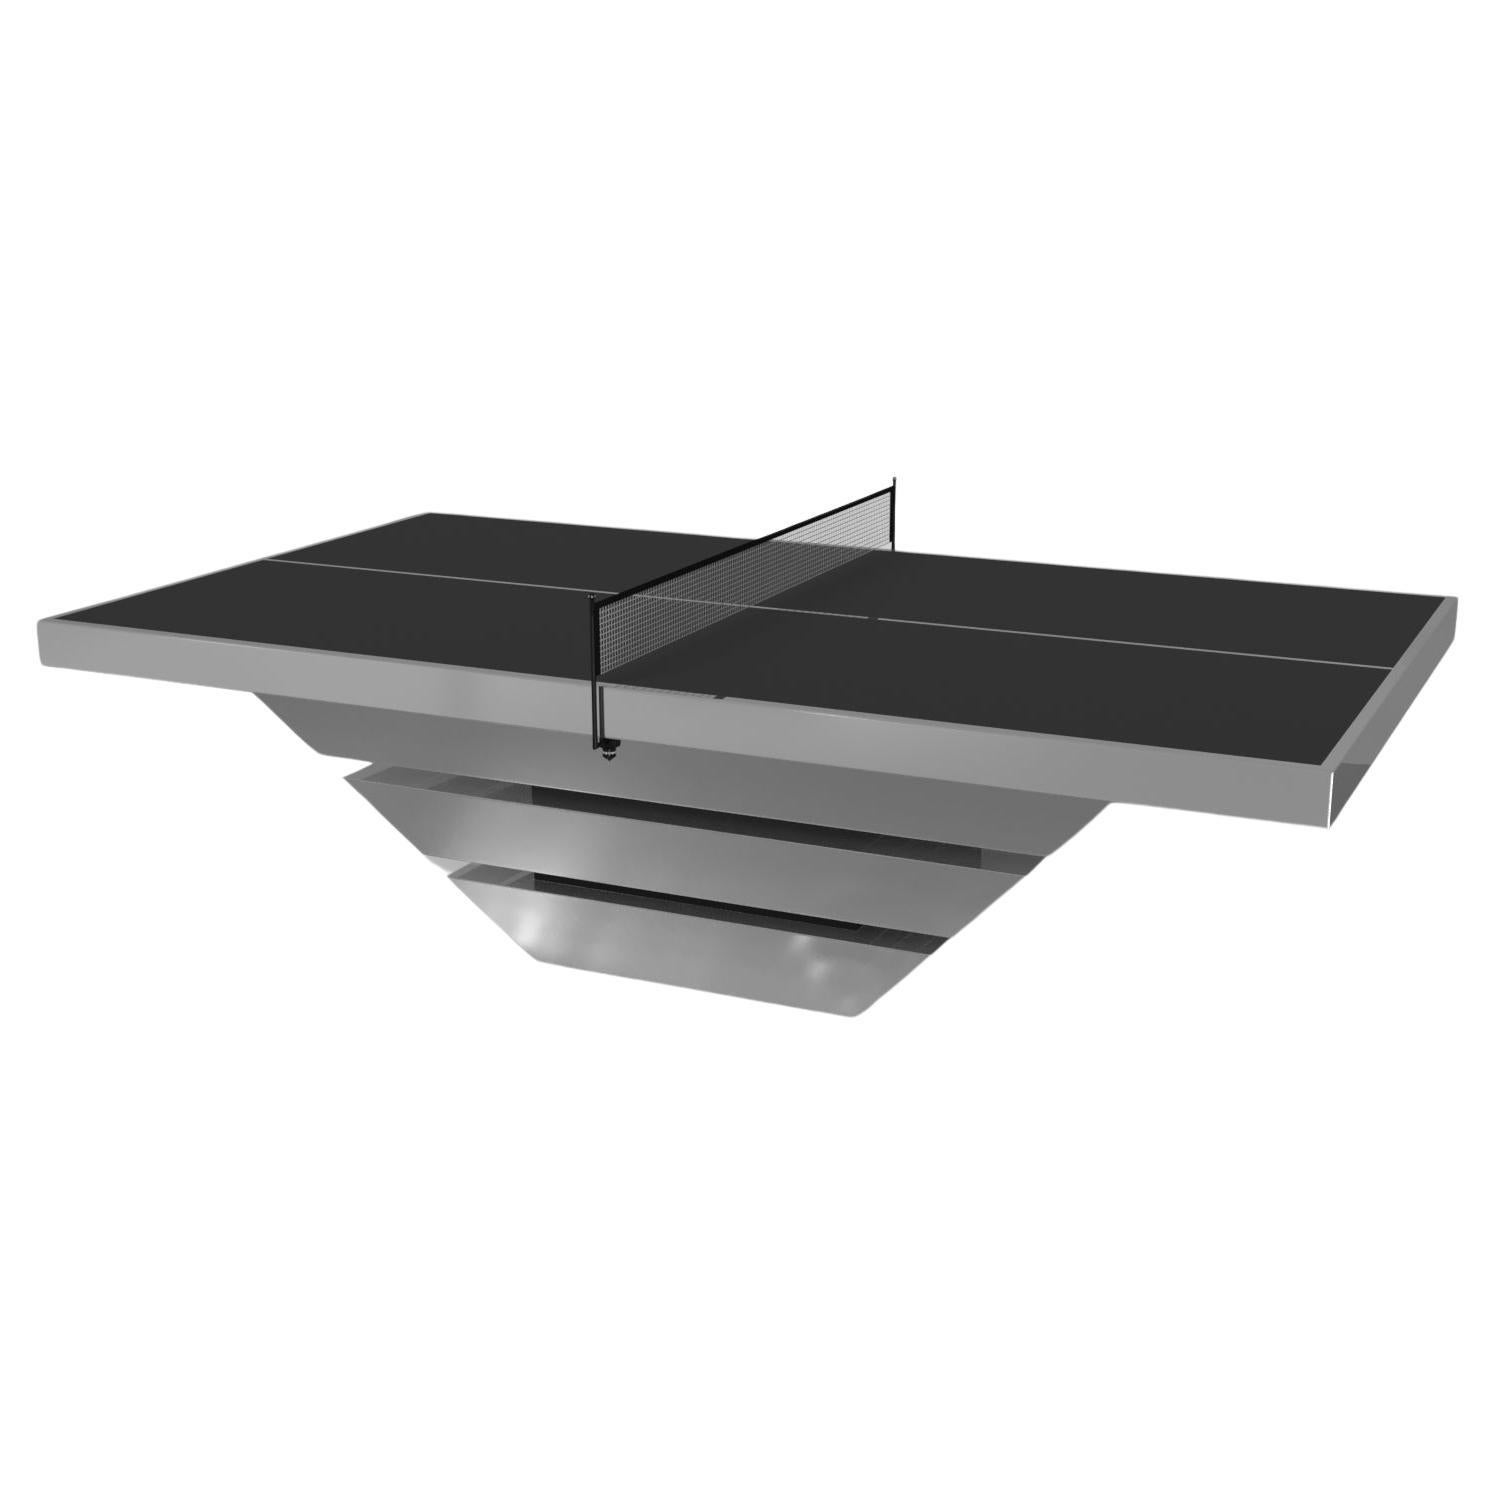 Elevate Customs Louve Tennis Table/Stainless Steel Sheet Metal in 9'-Made in USA For Sale